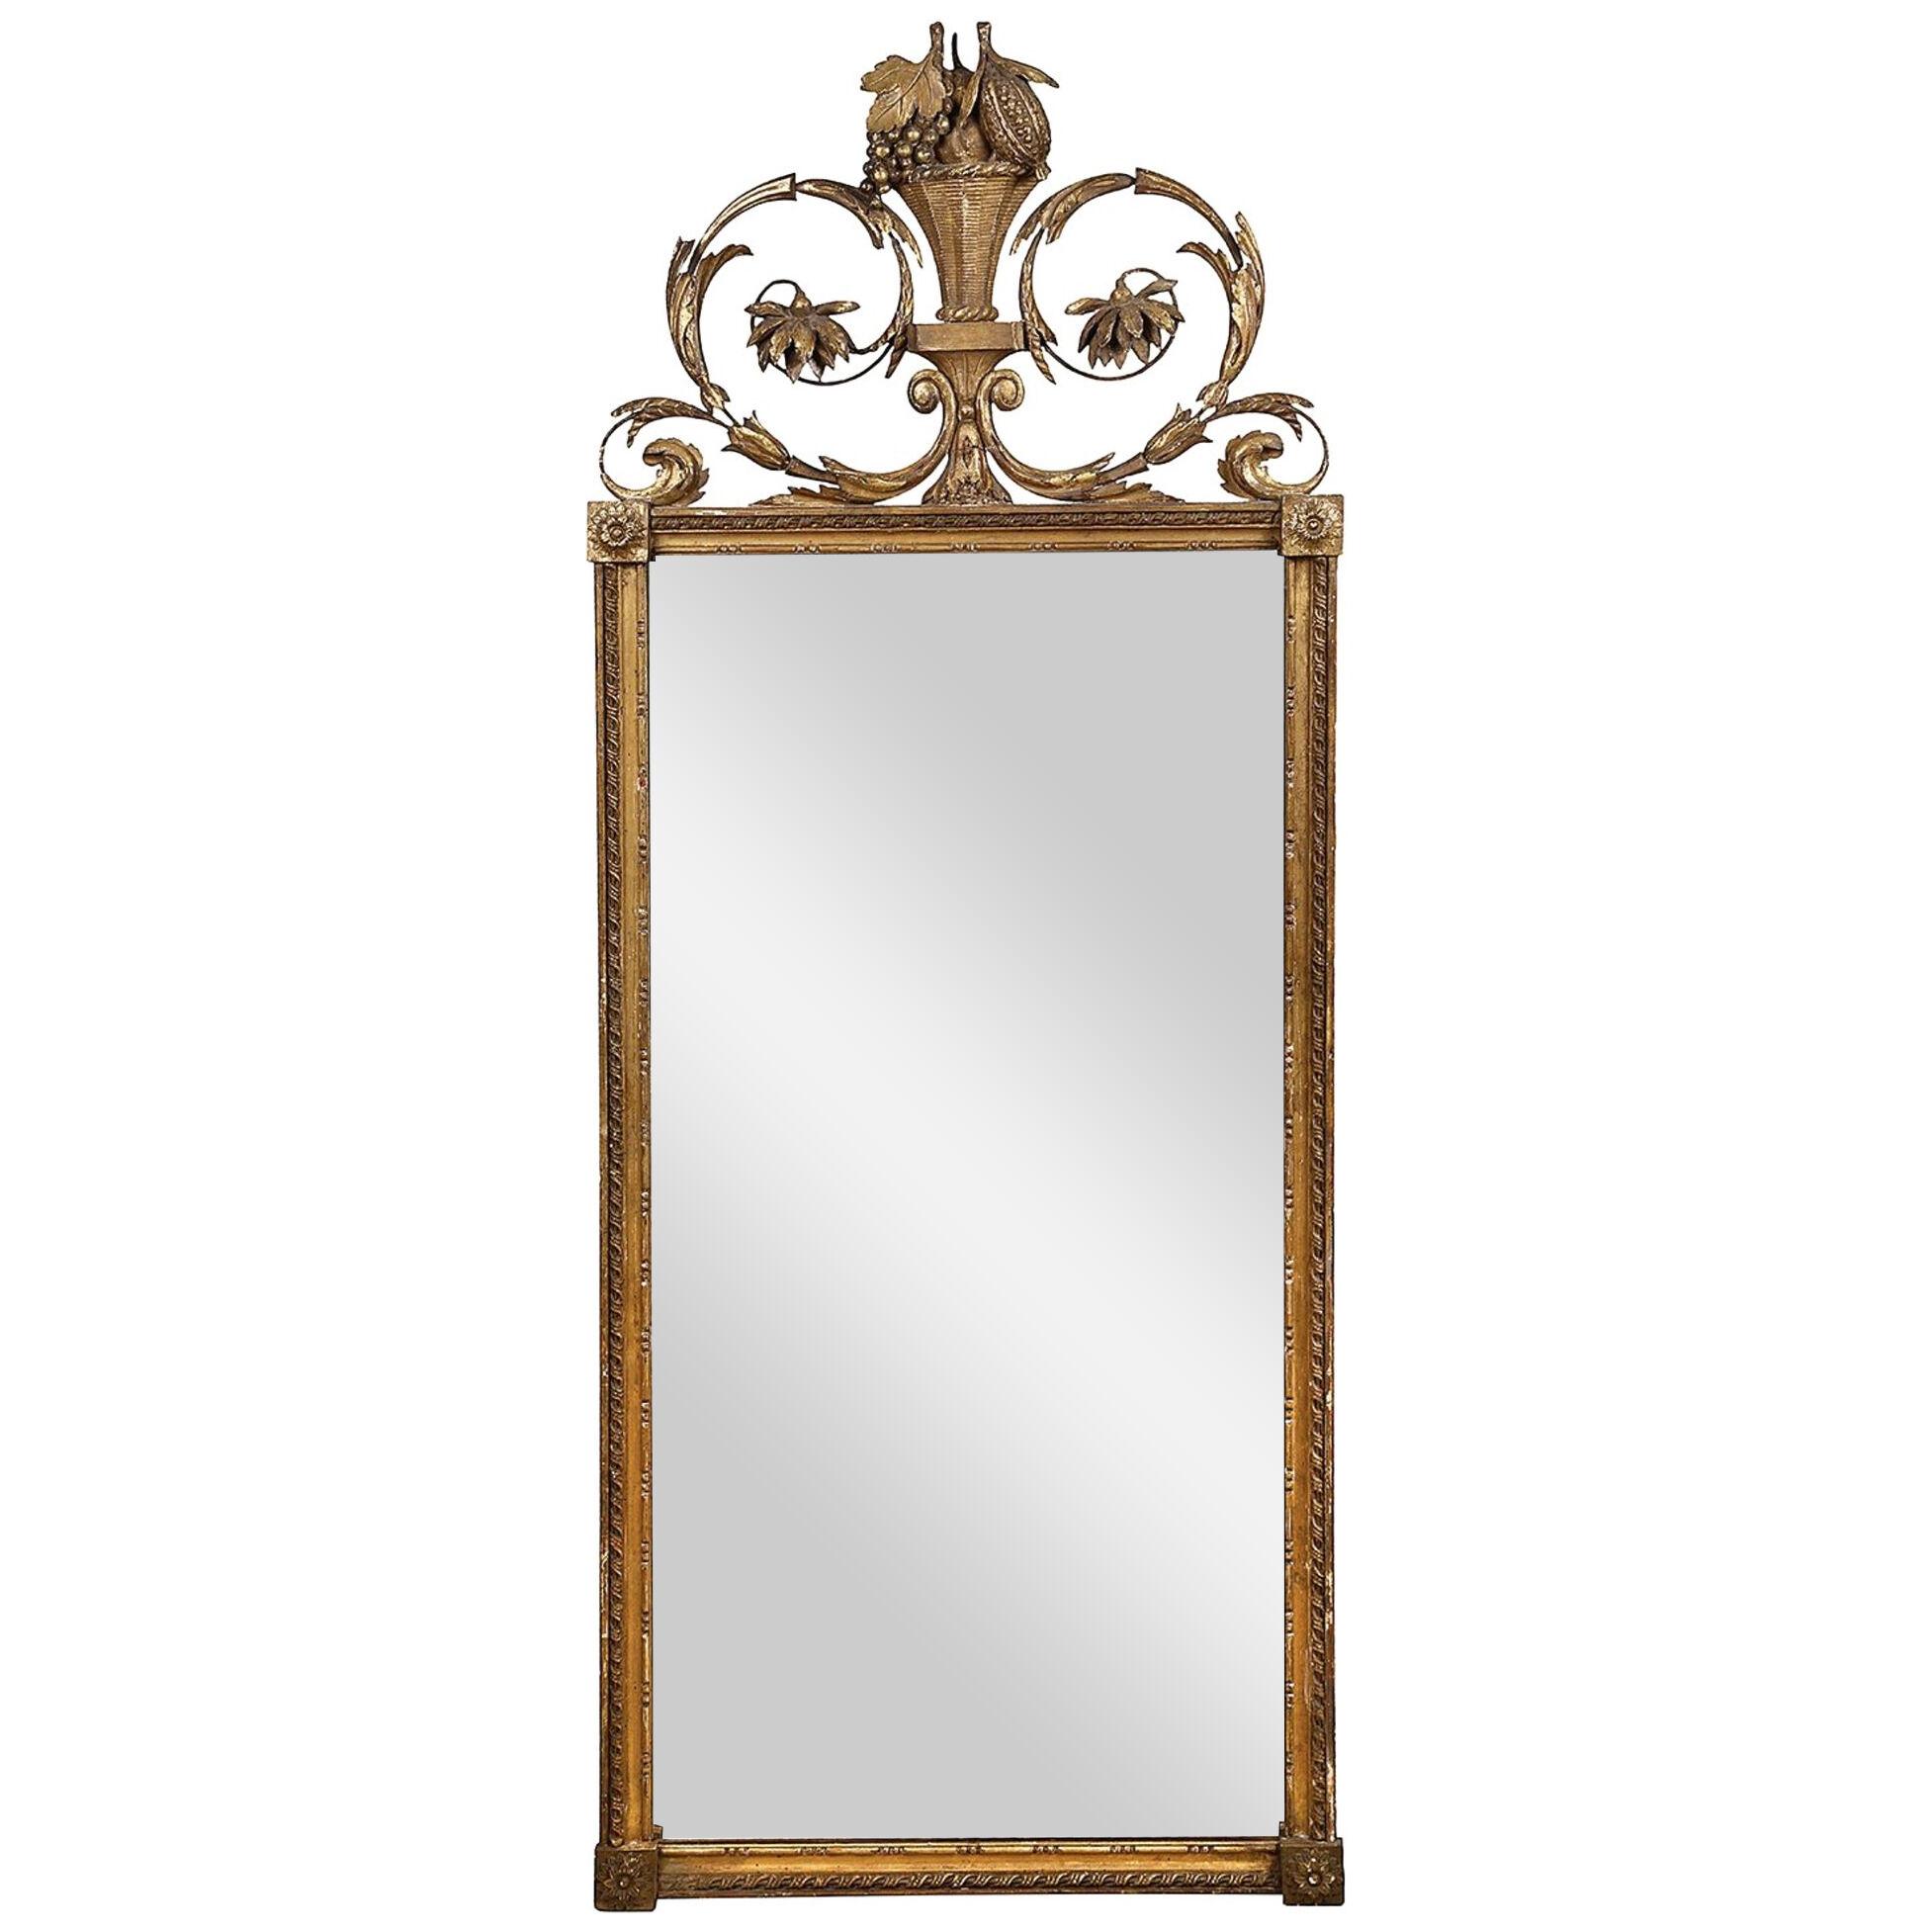 Early 19th Century French giltwood wall mirror.